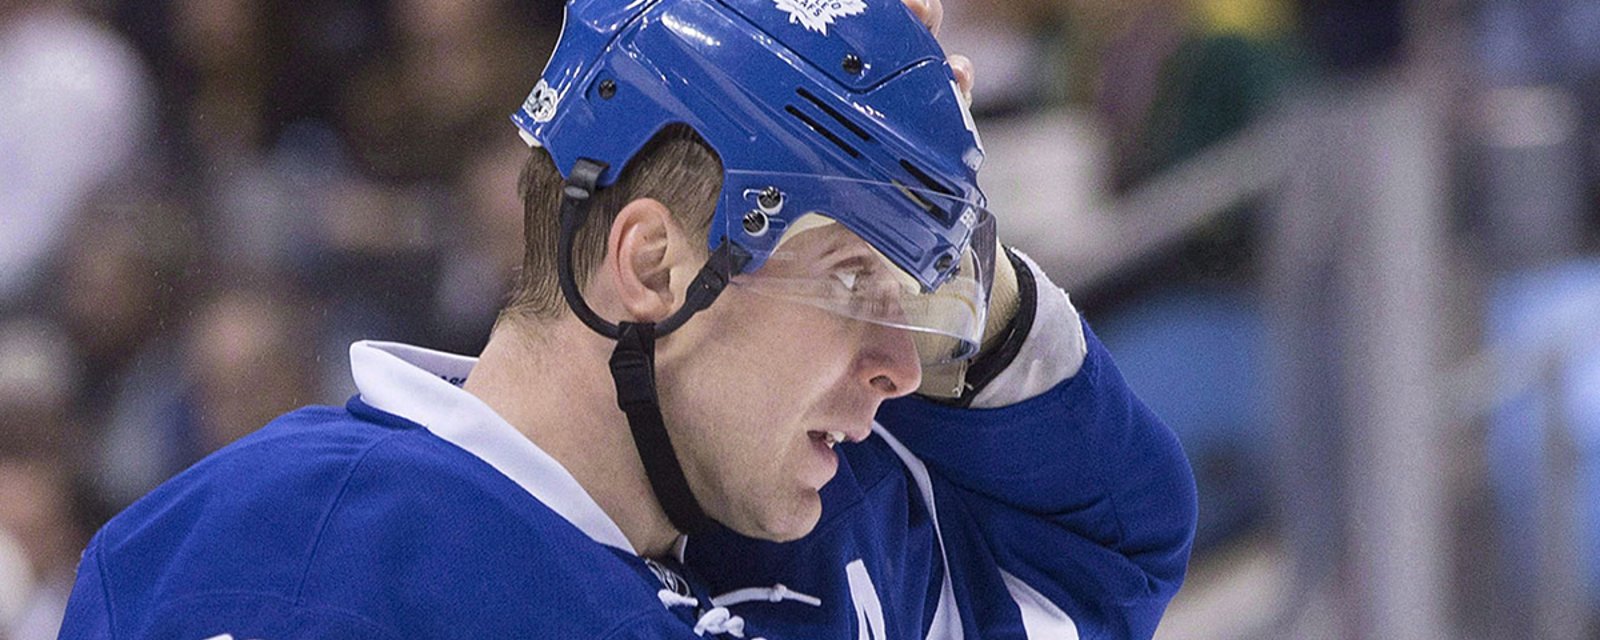 Report: How close are the Leafs to trading Bozak or JVR?